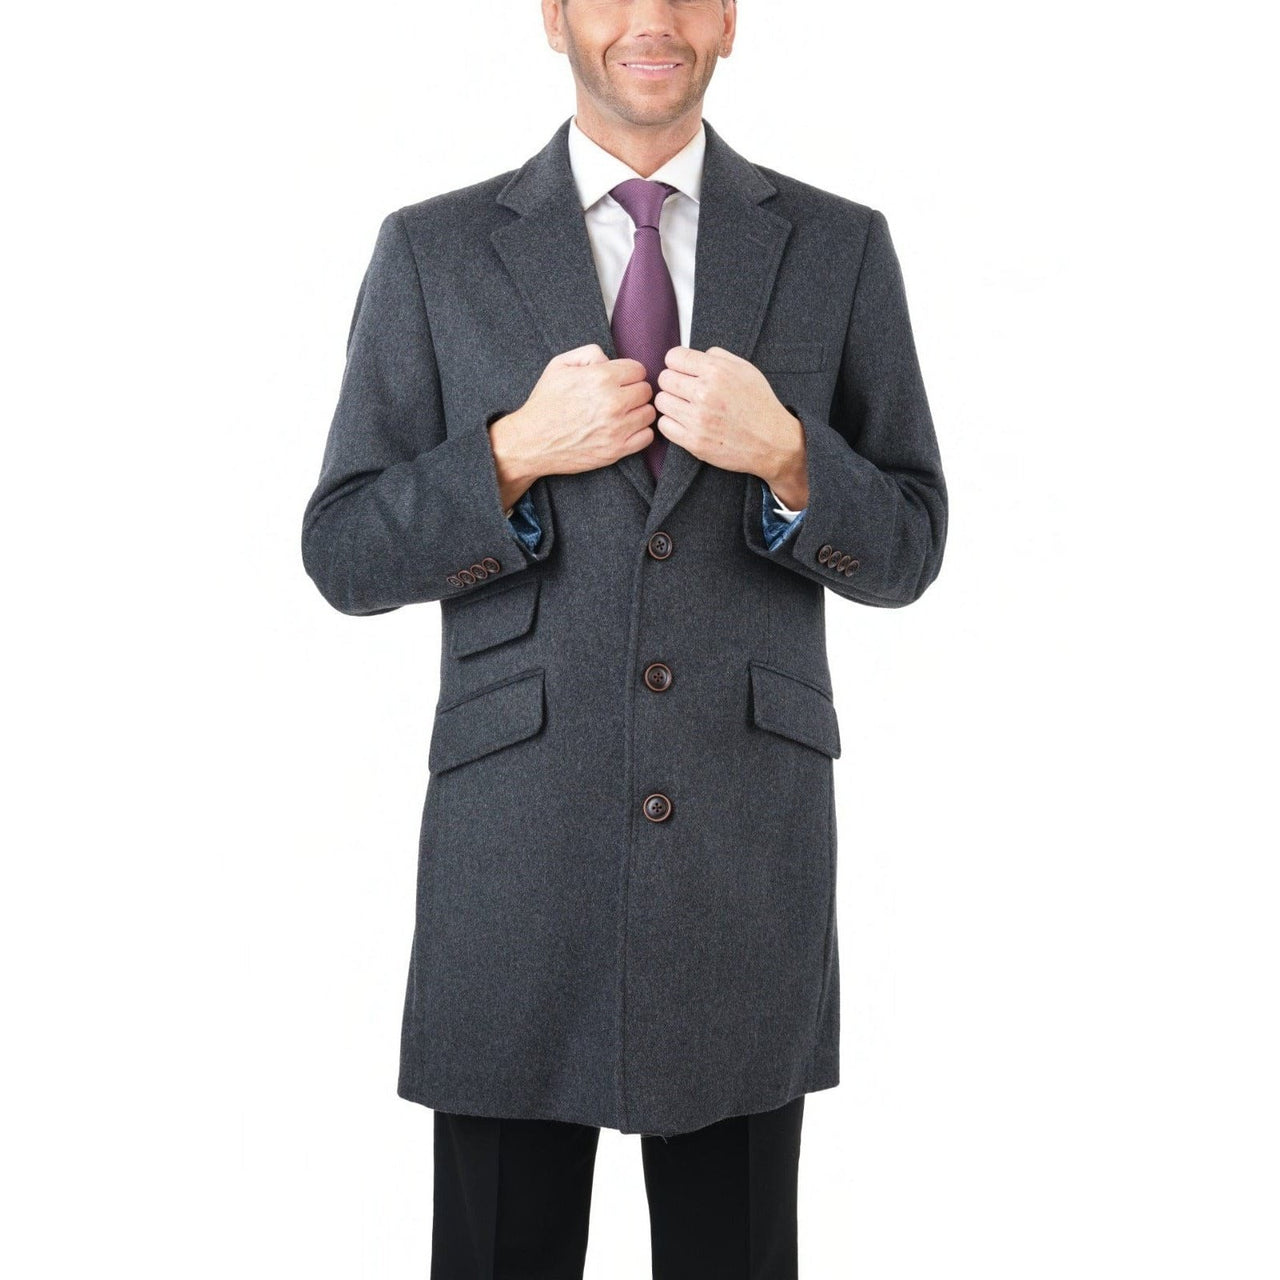 Arthur Black OUTERWEAR The Suit Depot Men's Wool Cashmere Single Breasted Charcoal 3/4 Length Top Coat